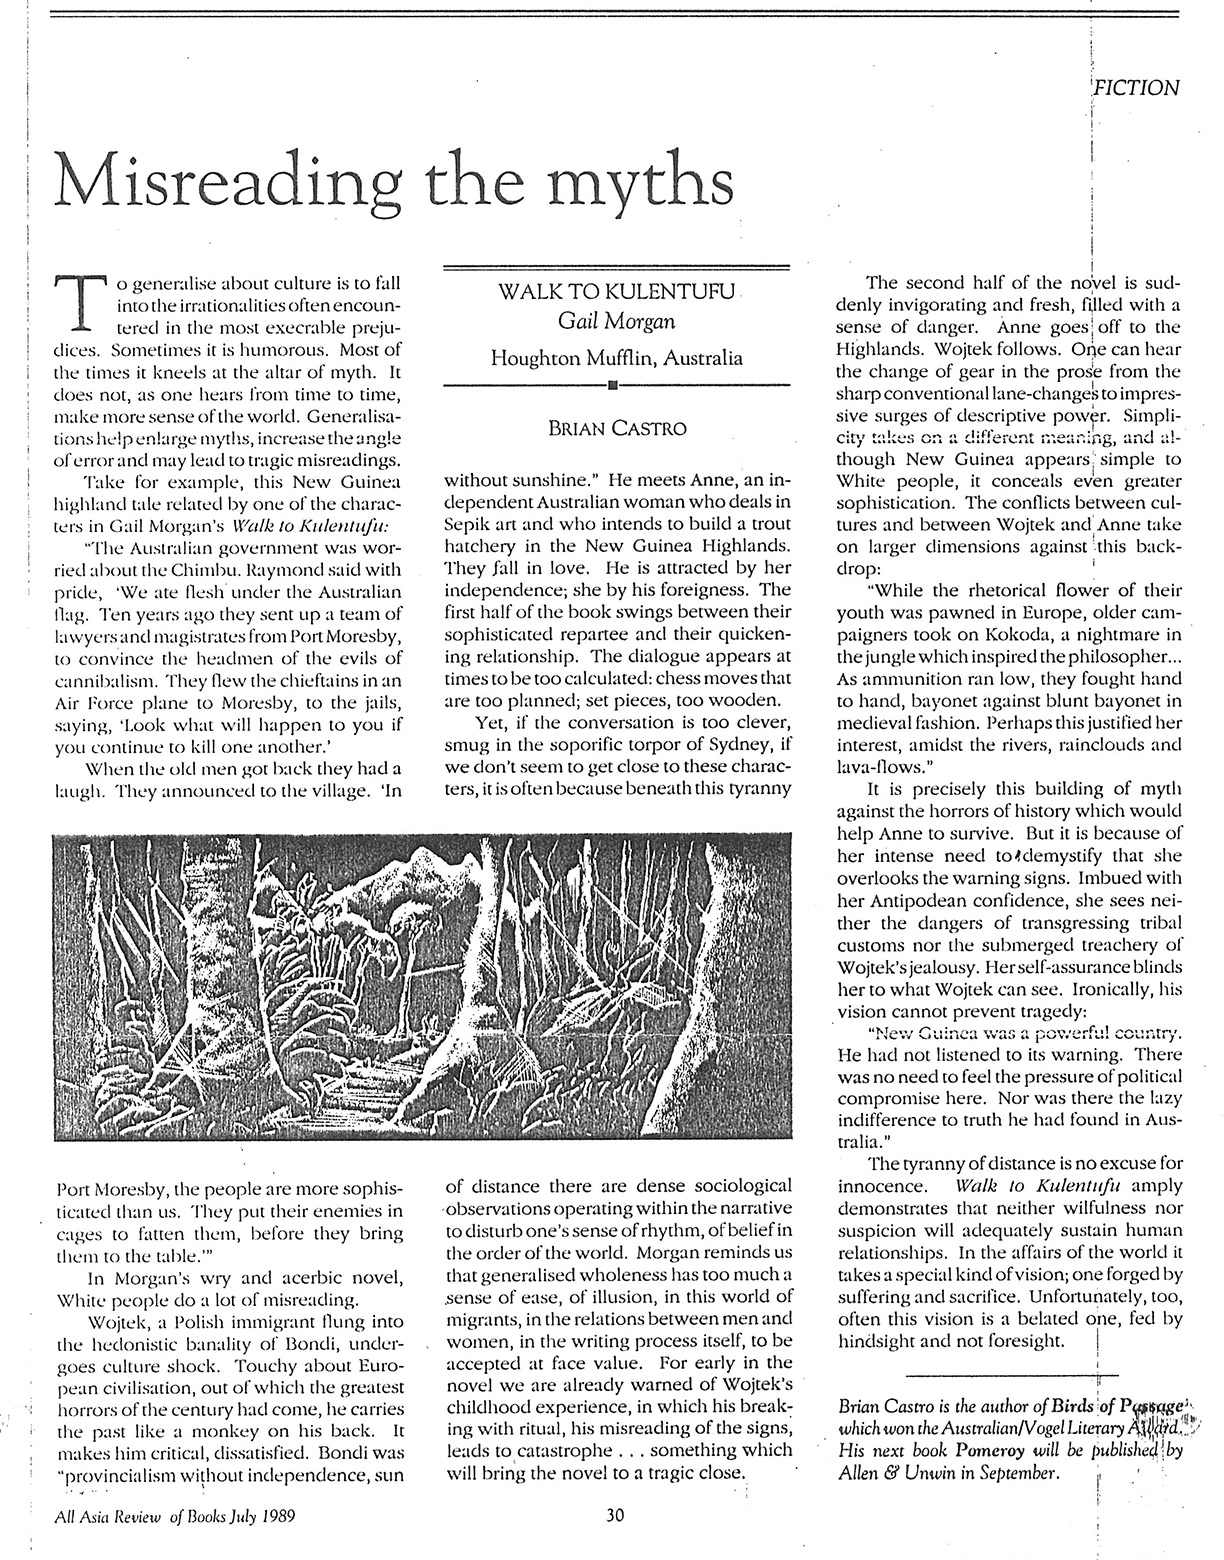 Misreading the Myths – Walk to Kulentufu Review by Brian Castro